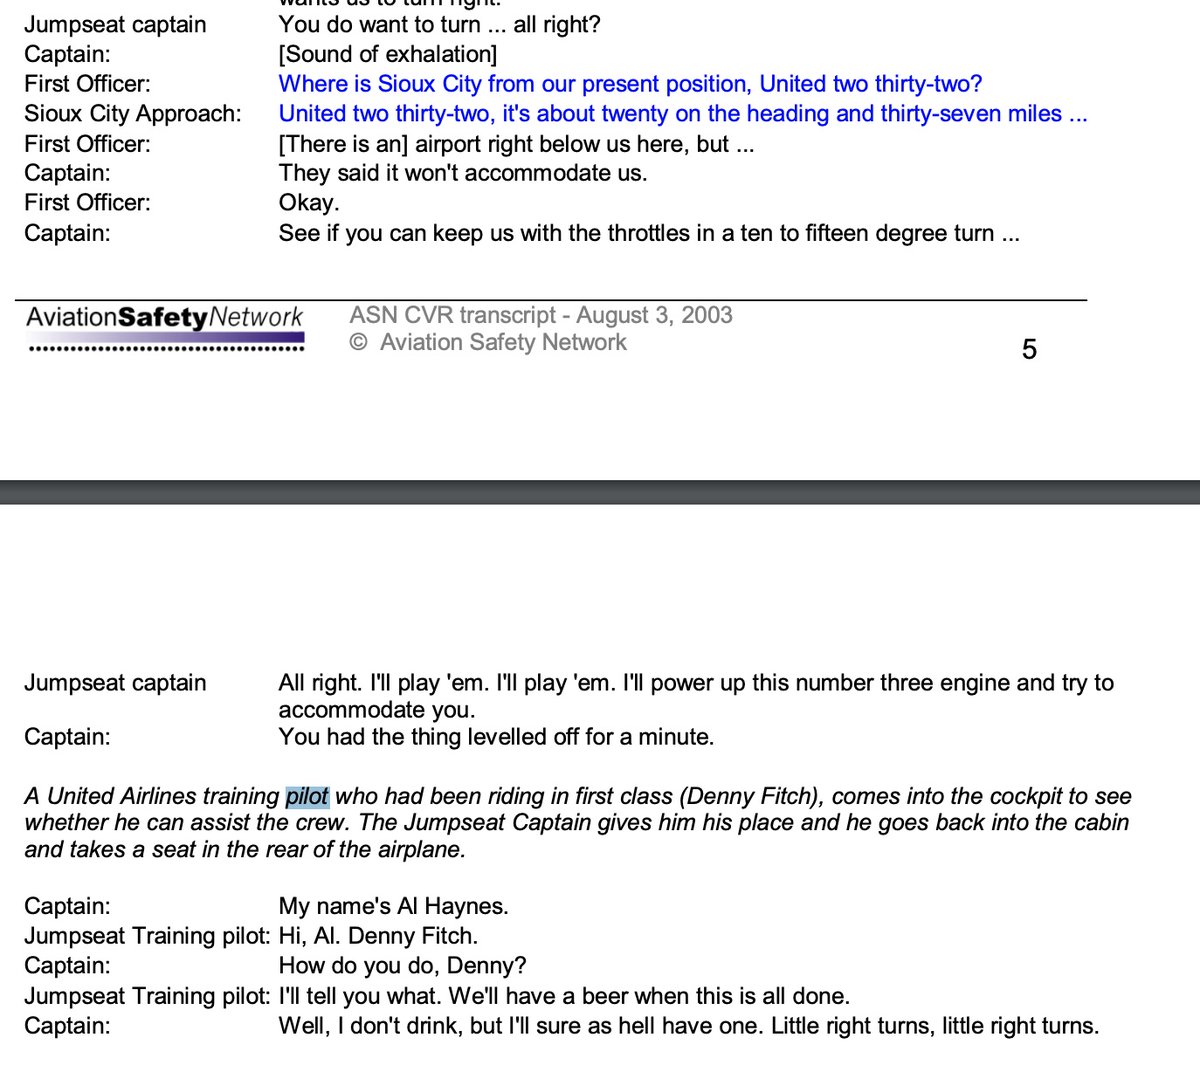 Something that really surprised me.  @allspaw  @jpaulreed, maybe you know the details?In this transcript, it appears that there was a Jumpseat Captain that was already handling the throttles, and gave up his spot for Captain Fitch. http://www.tailstrike.com/190789.pdf 